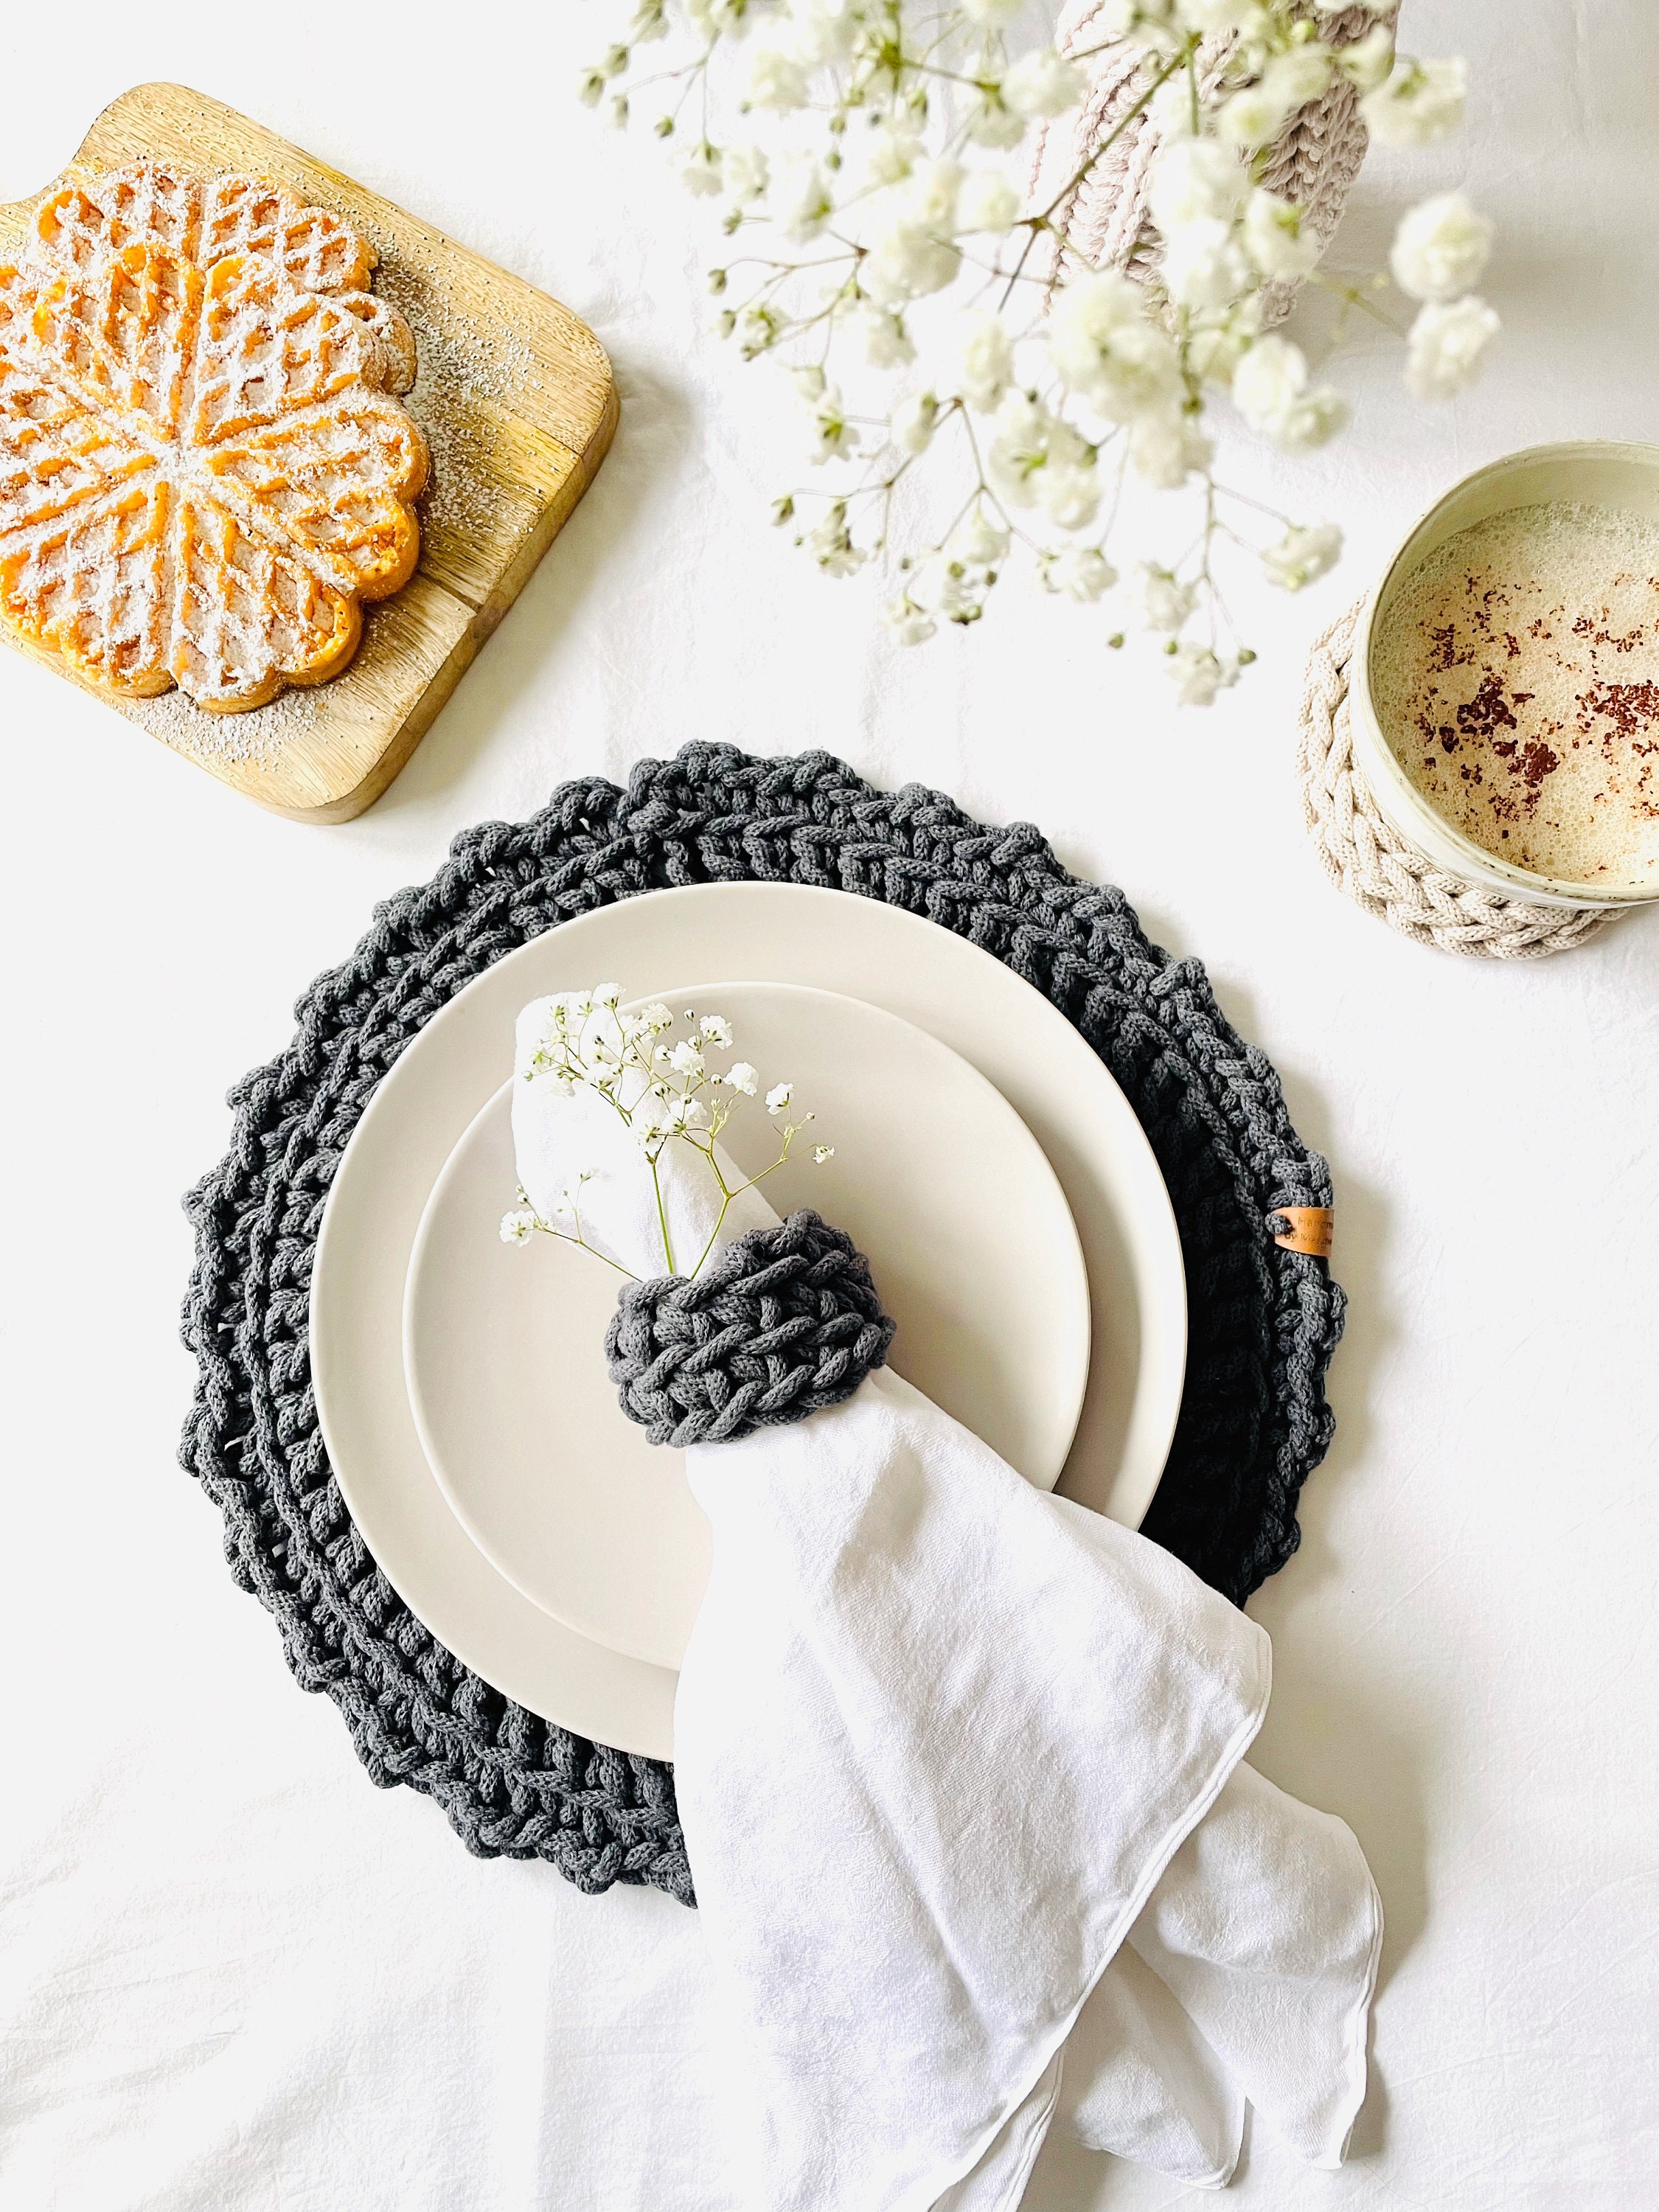 MAHINA - High-quality crochet lids for your DIY project - discover